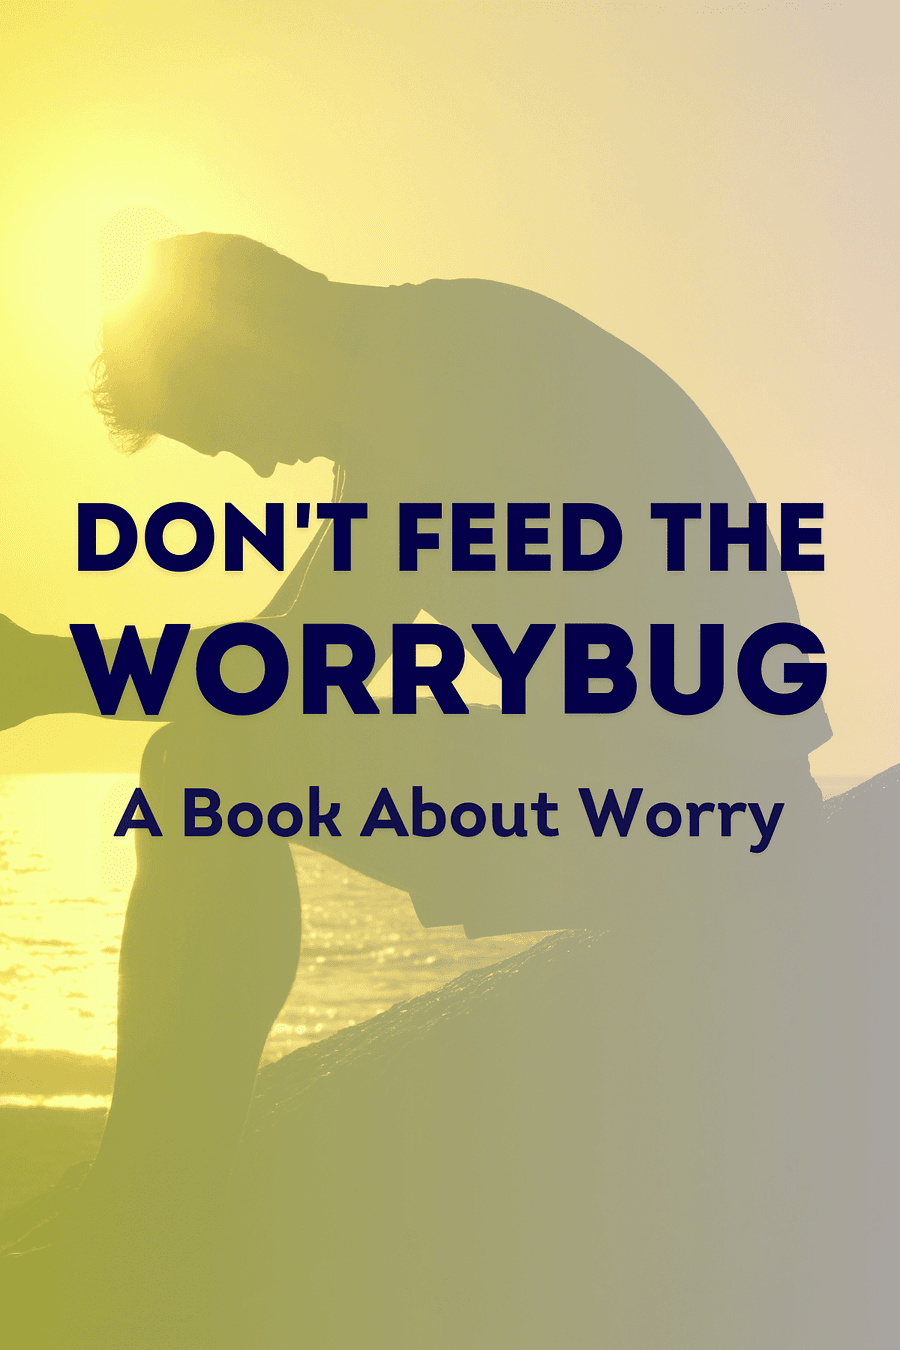 Don't Feed The WorryBug by Andi Green - Book Summary